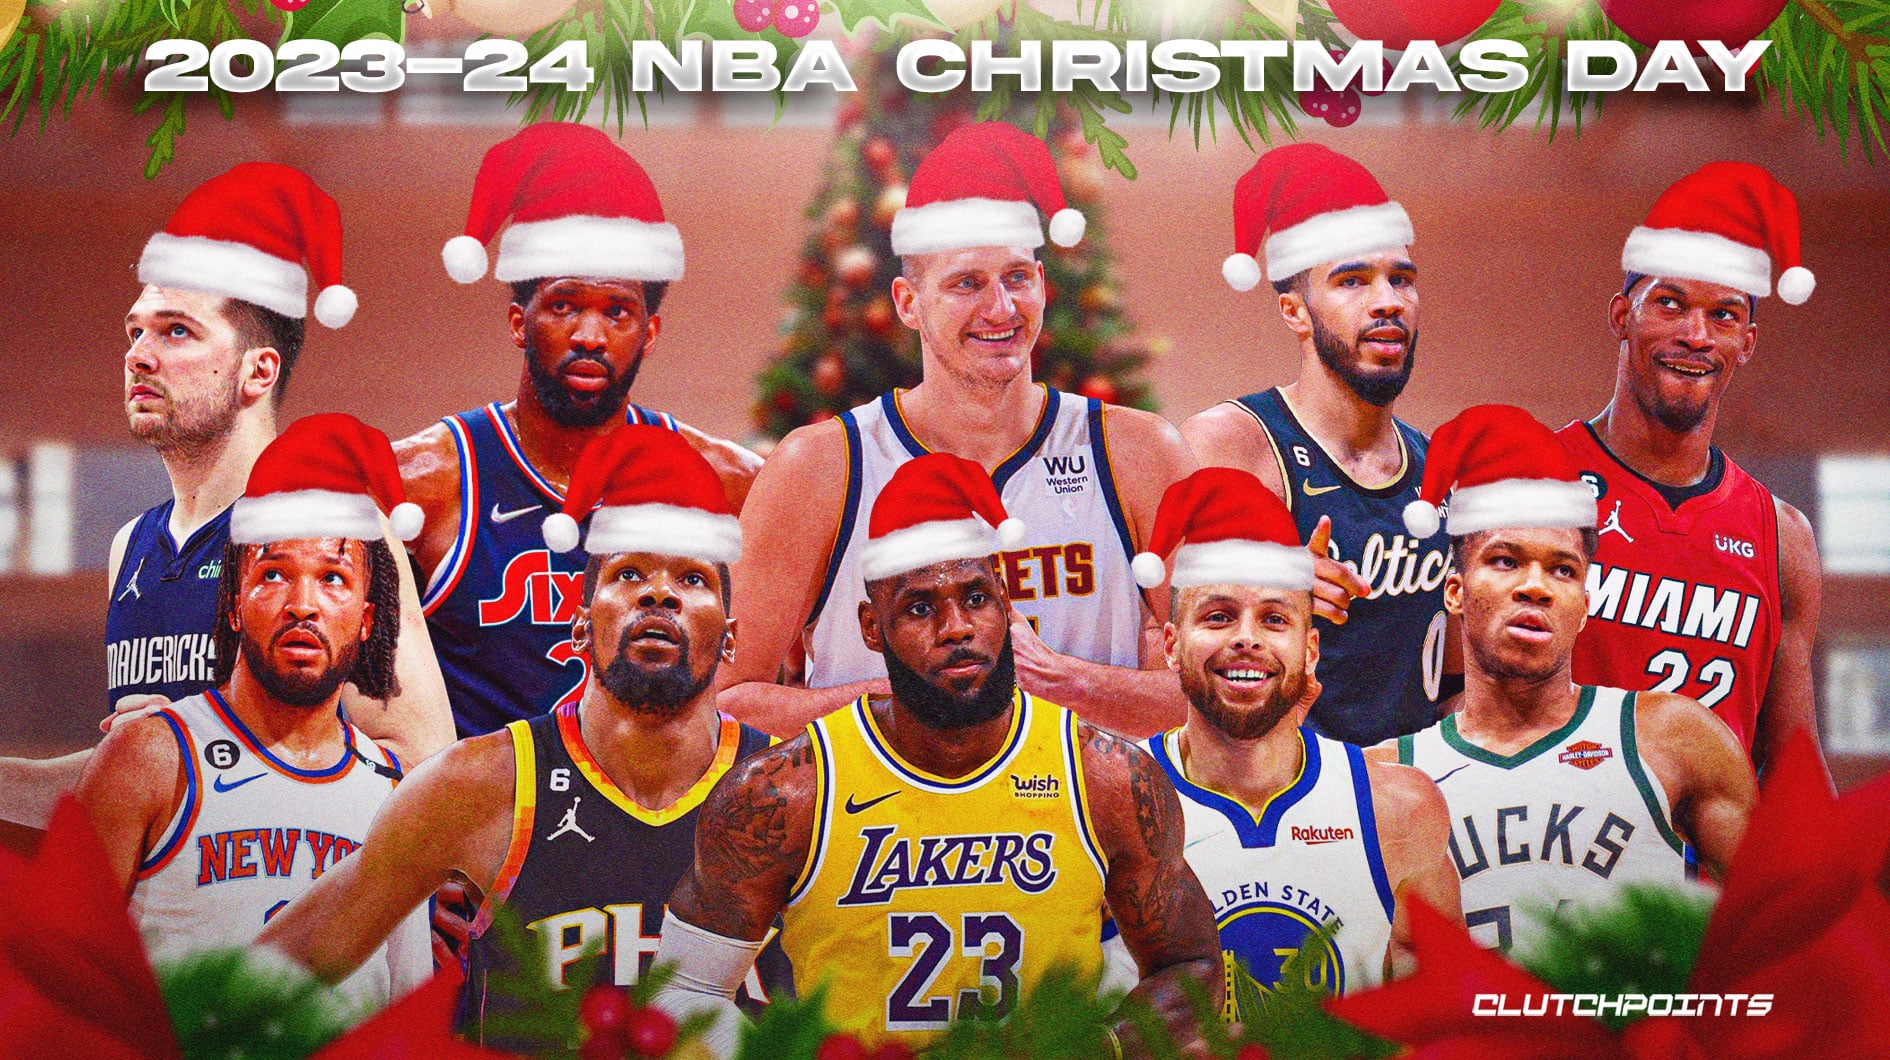 New York Knicks: Their 5 Most Memorable Christmas Day Games in NBA